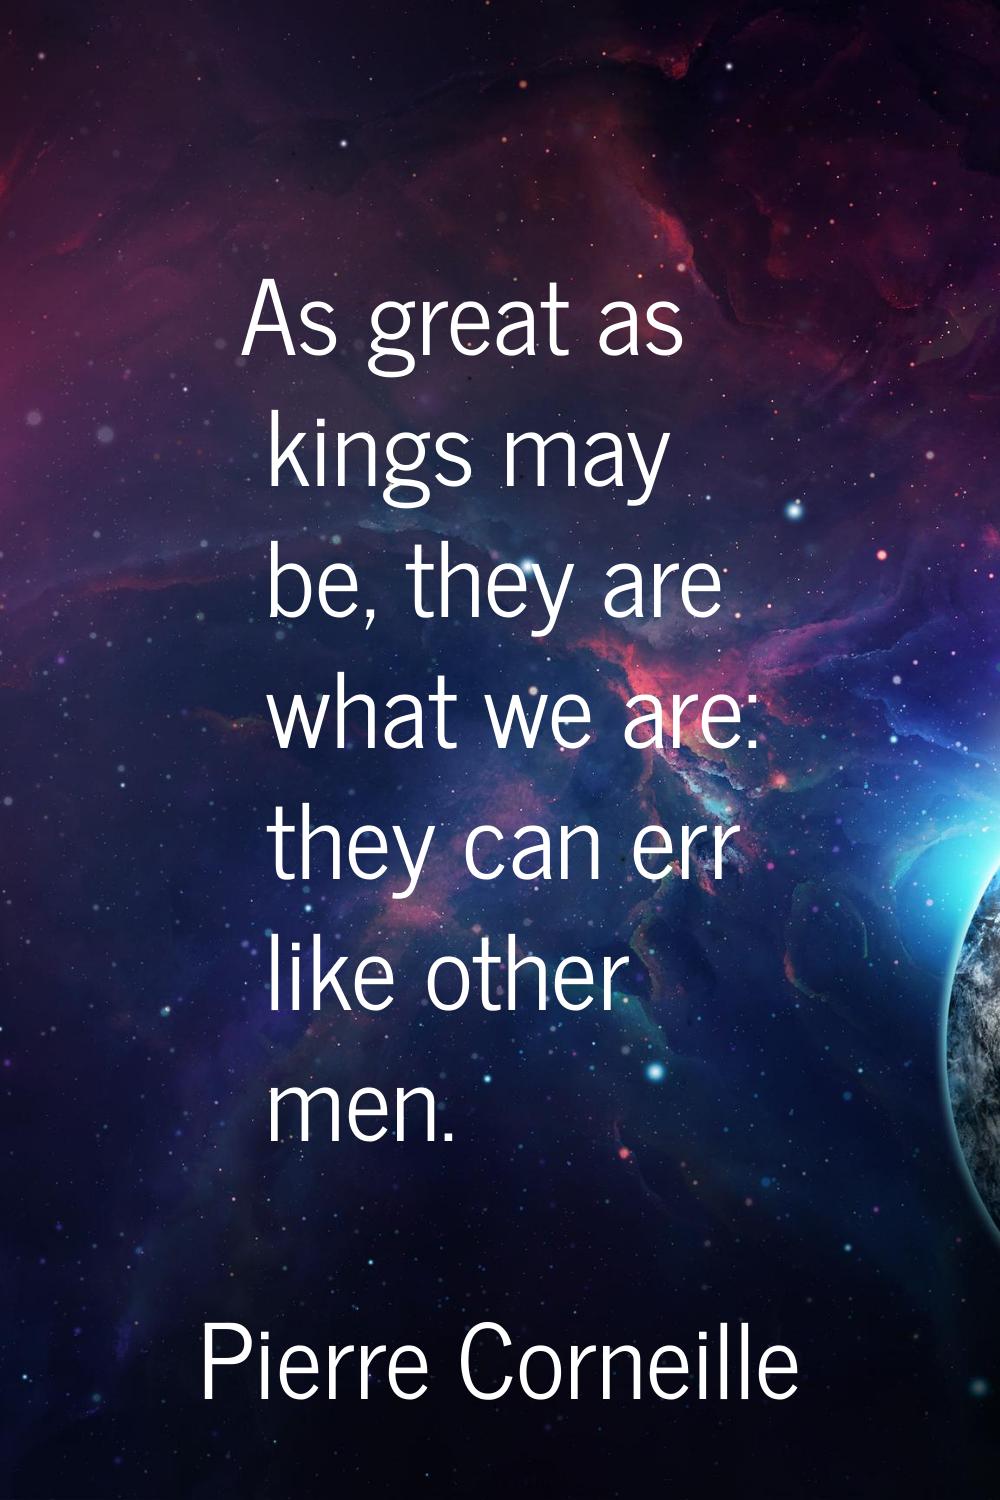 As great as kings may be, they are what we are: they can err like other men.